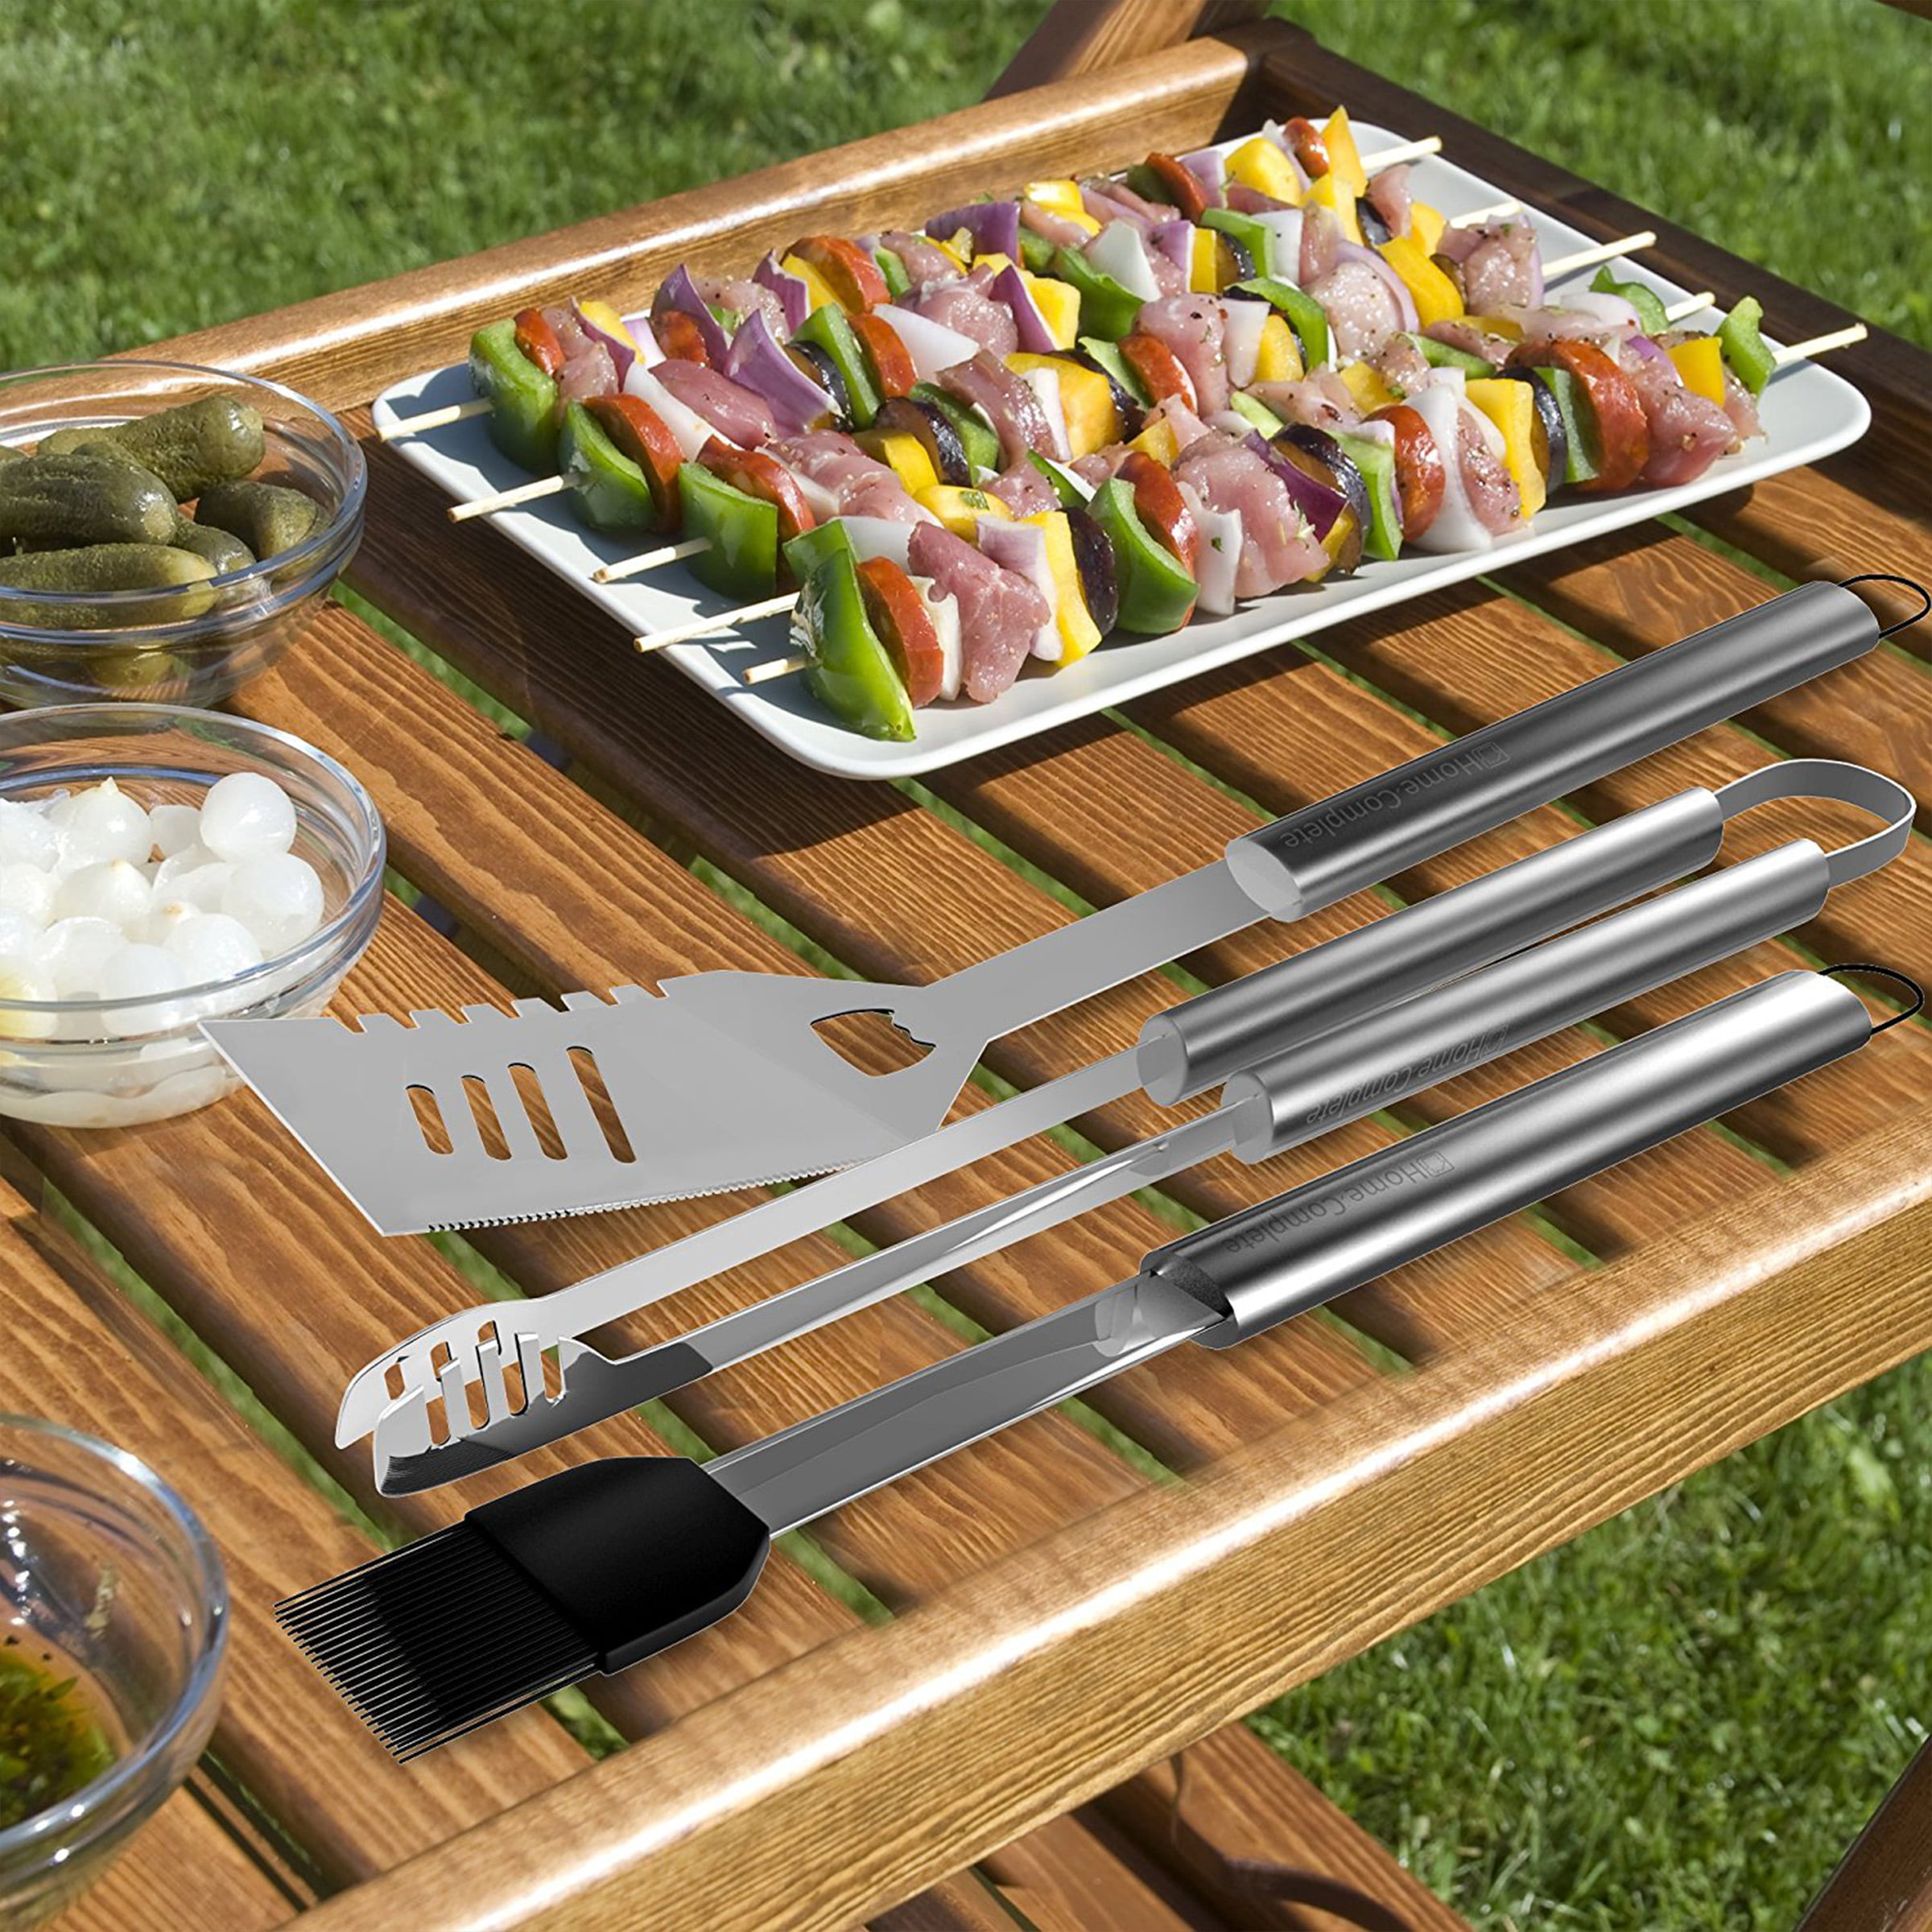 Taimasi 34Pcs BBQ Grill Accessories Tools Set, 16 Inches Stainless Steel  Grilling Tools with Carry - Cooking Utensils, Facebook Marketplace